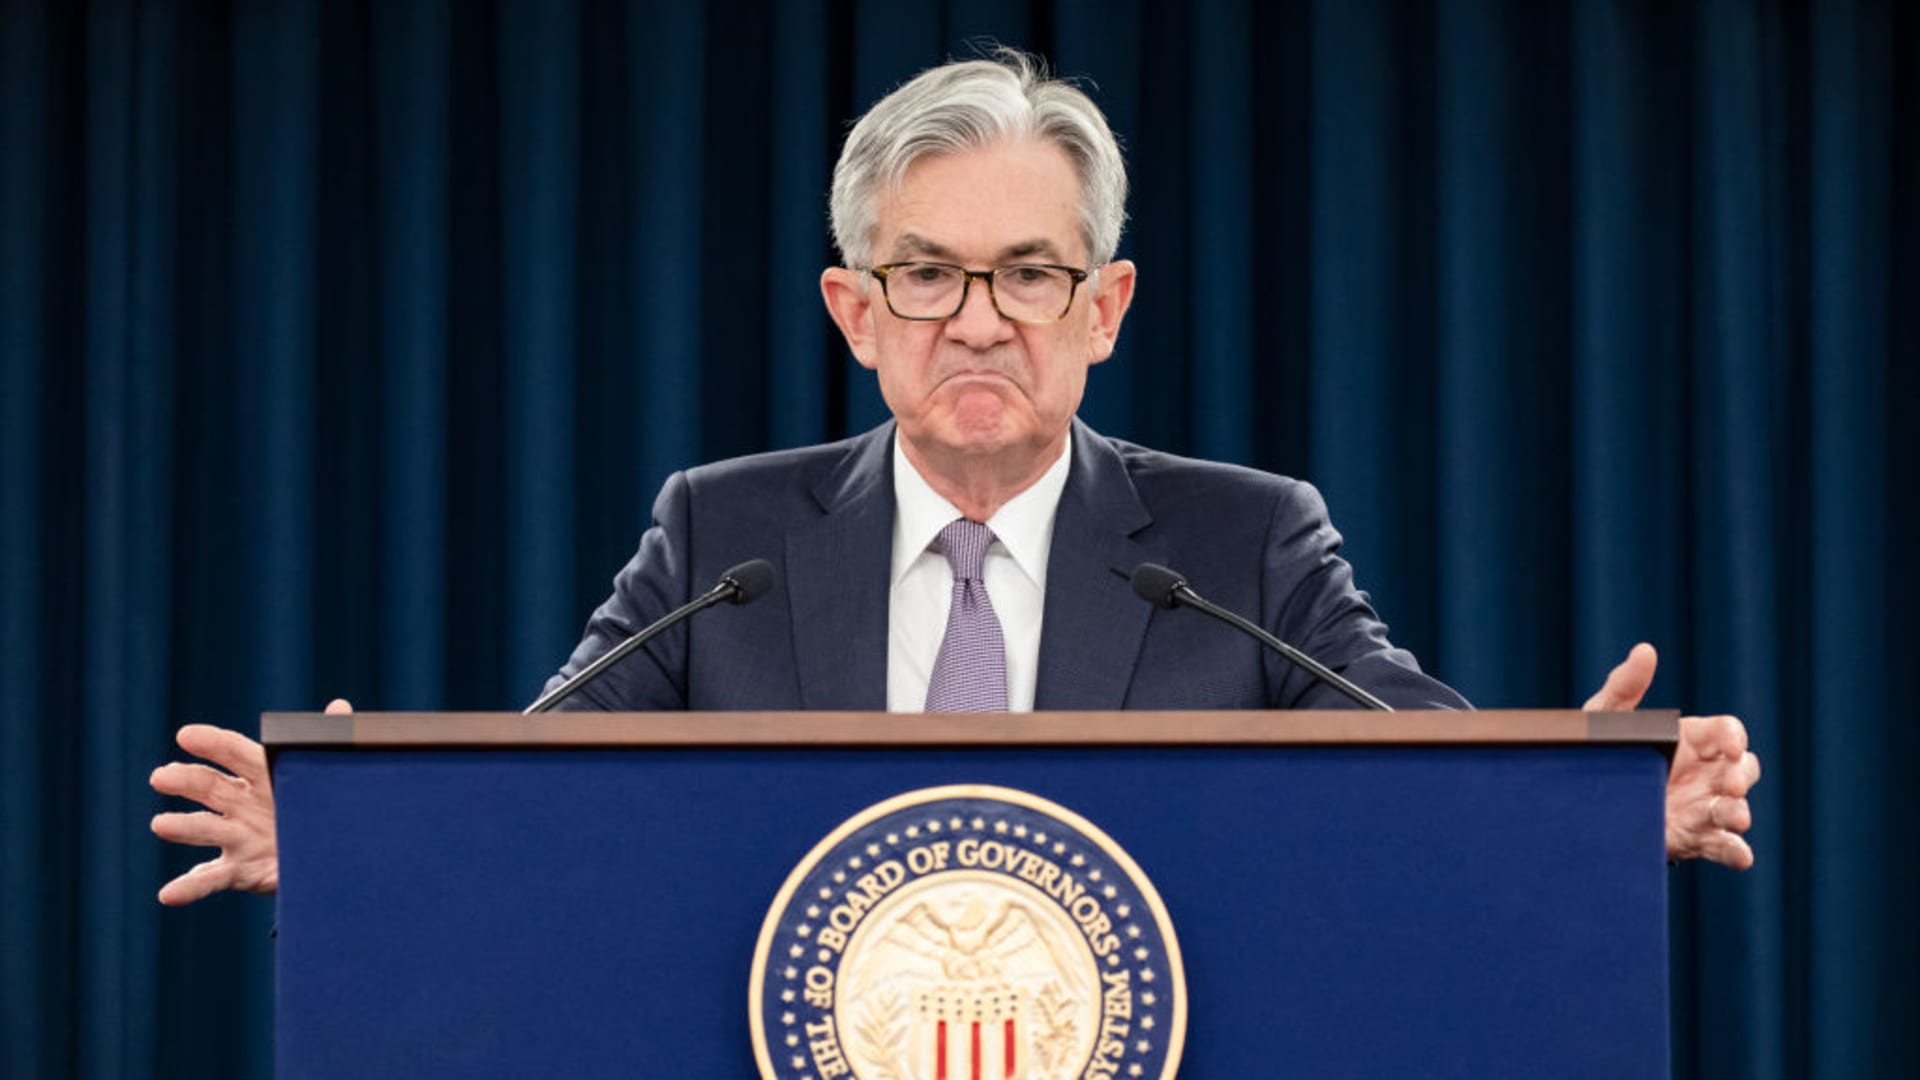 Inflation is up 8.3% since last year—and more Fed rate hikes are likely looming